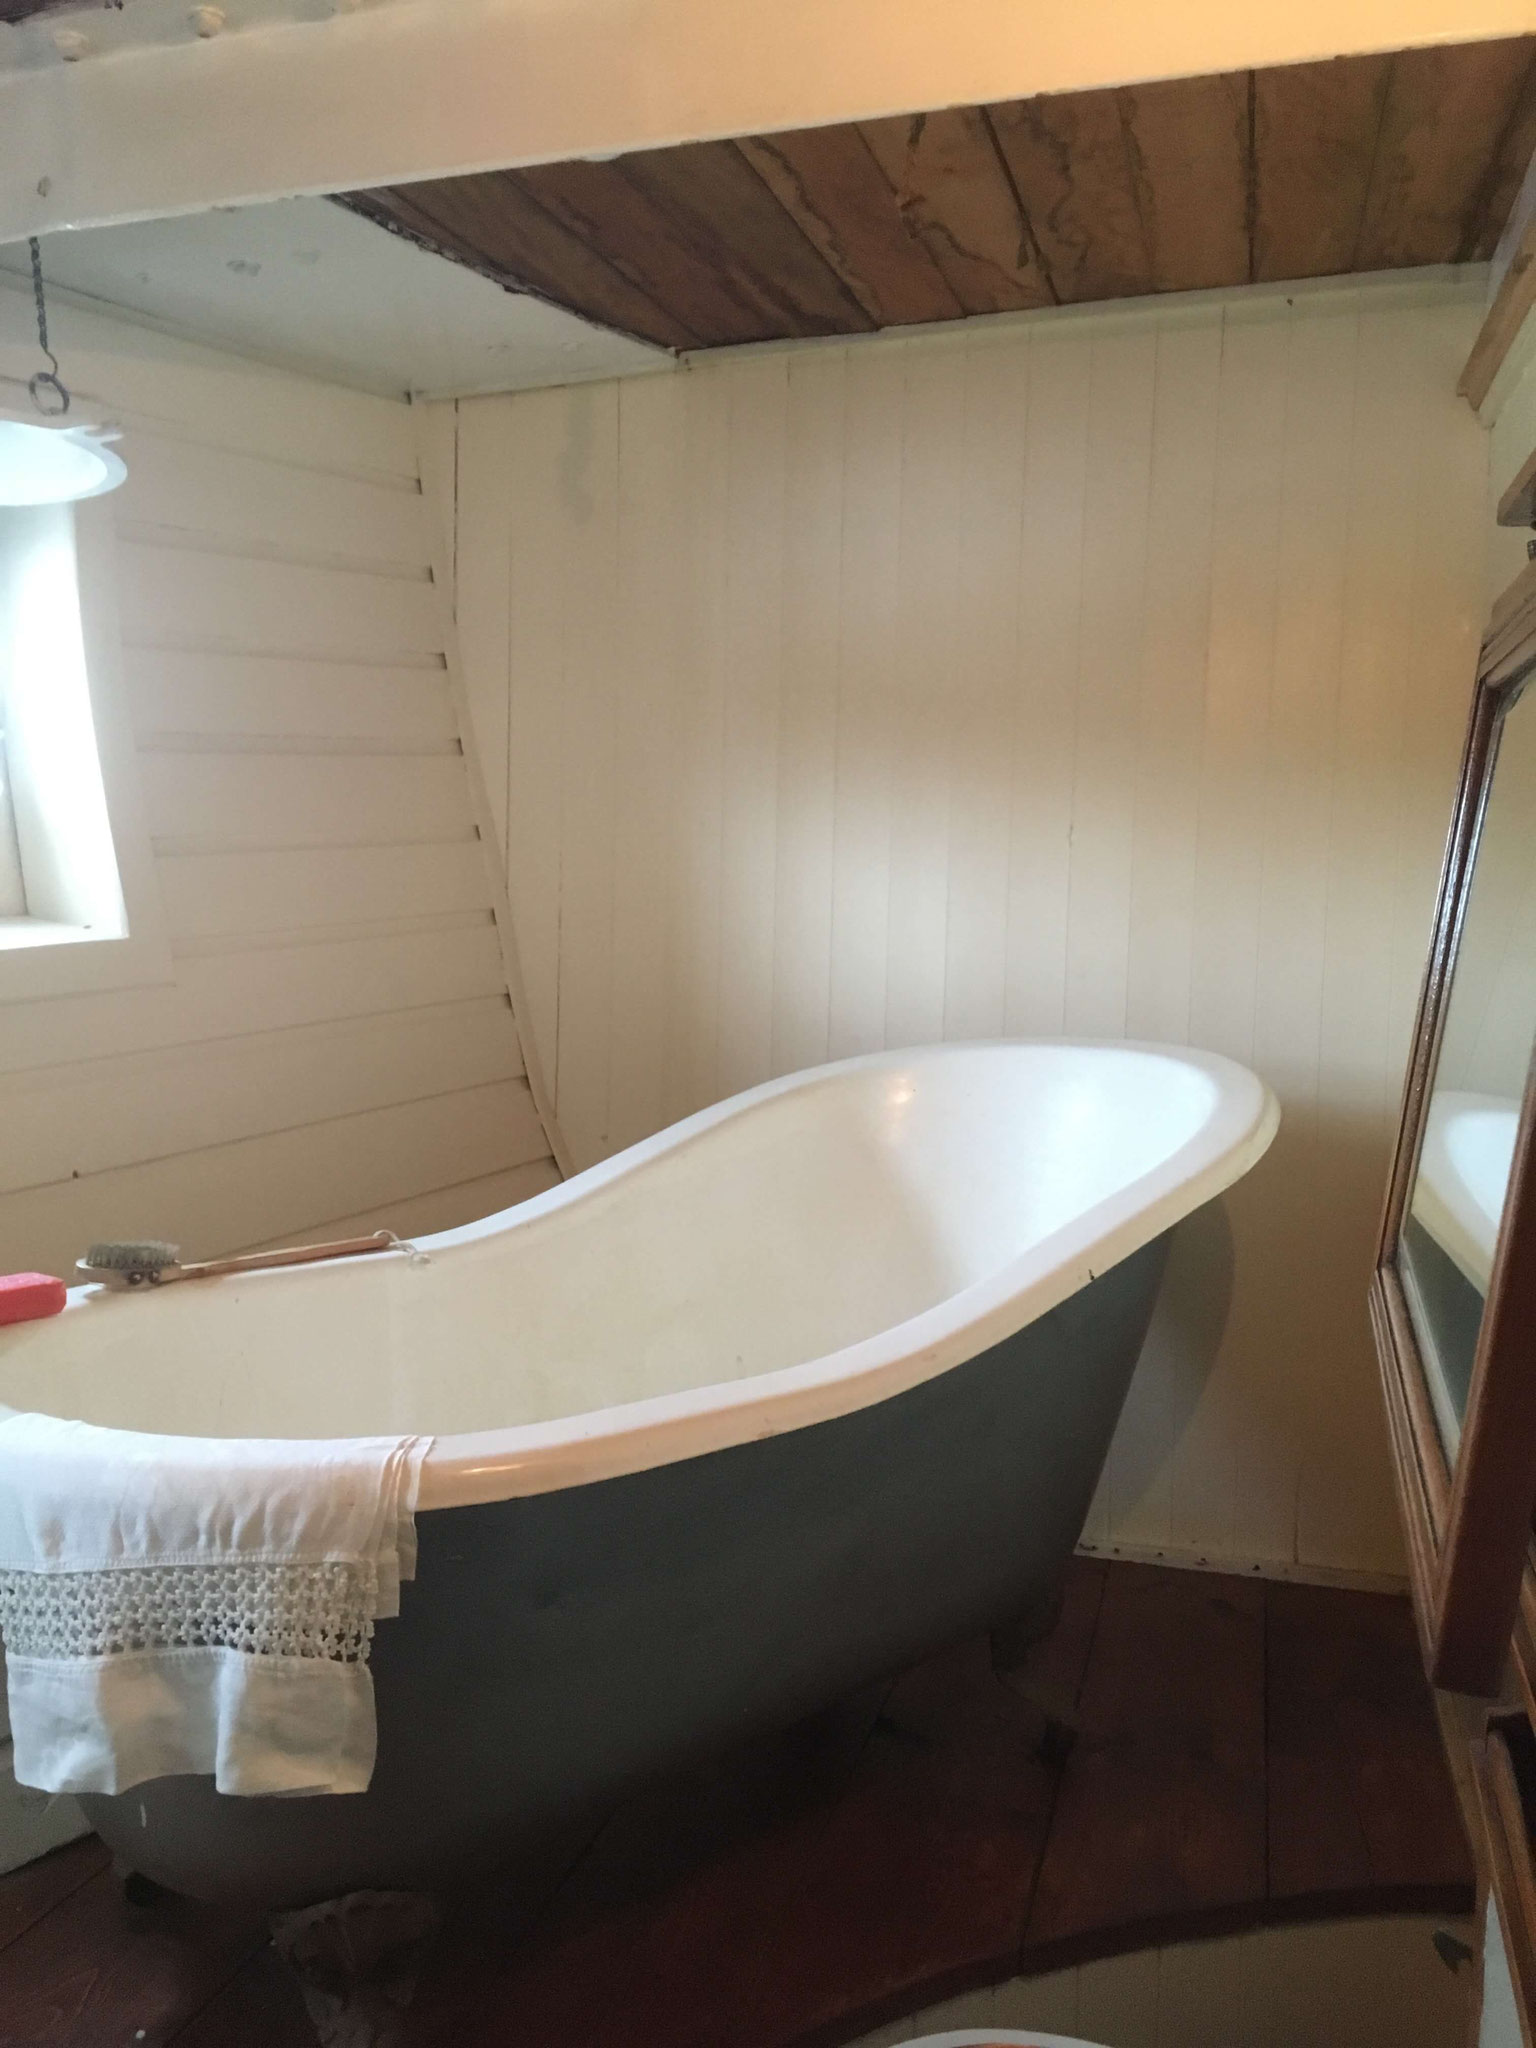 The captain of the Glenlee had his own bathroom